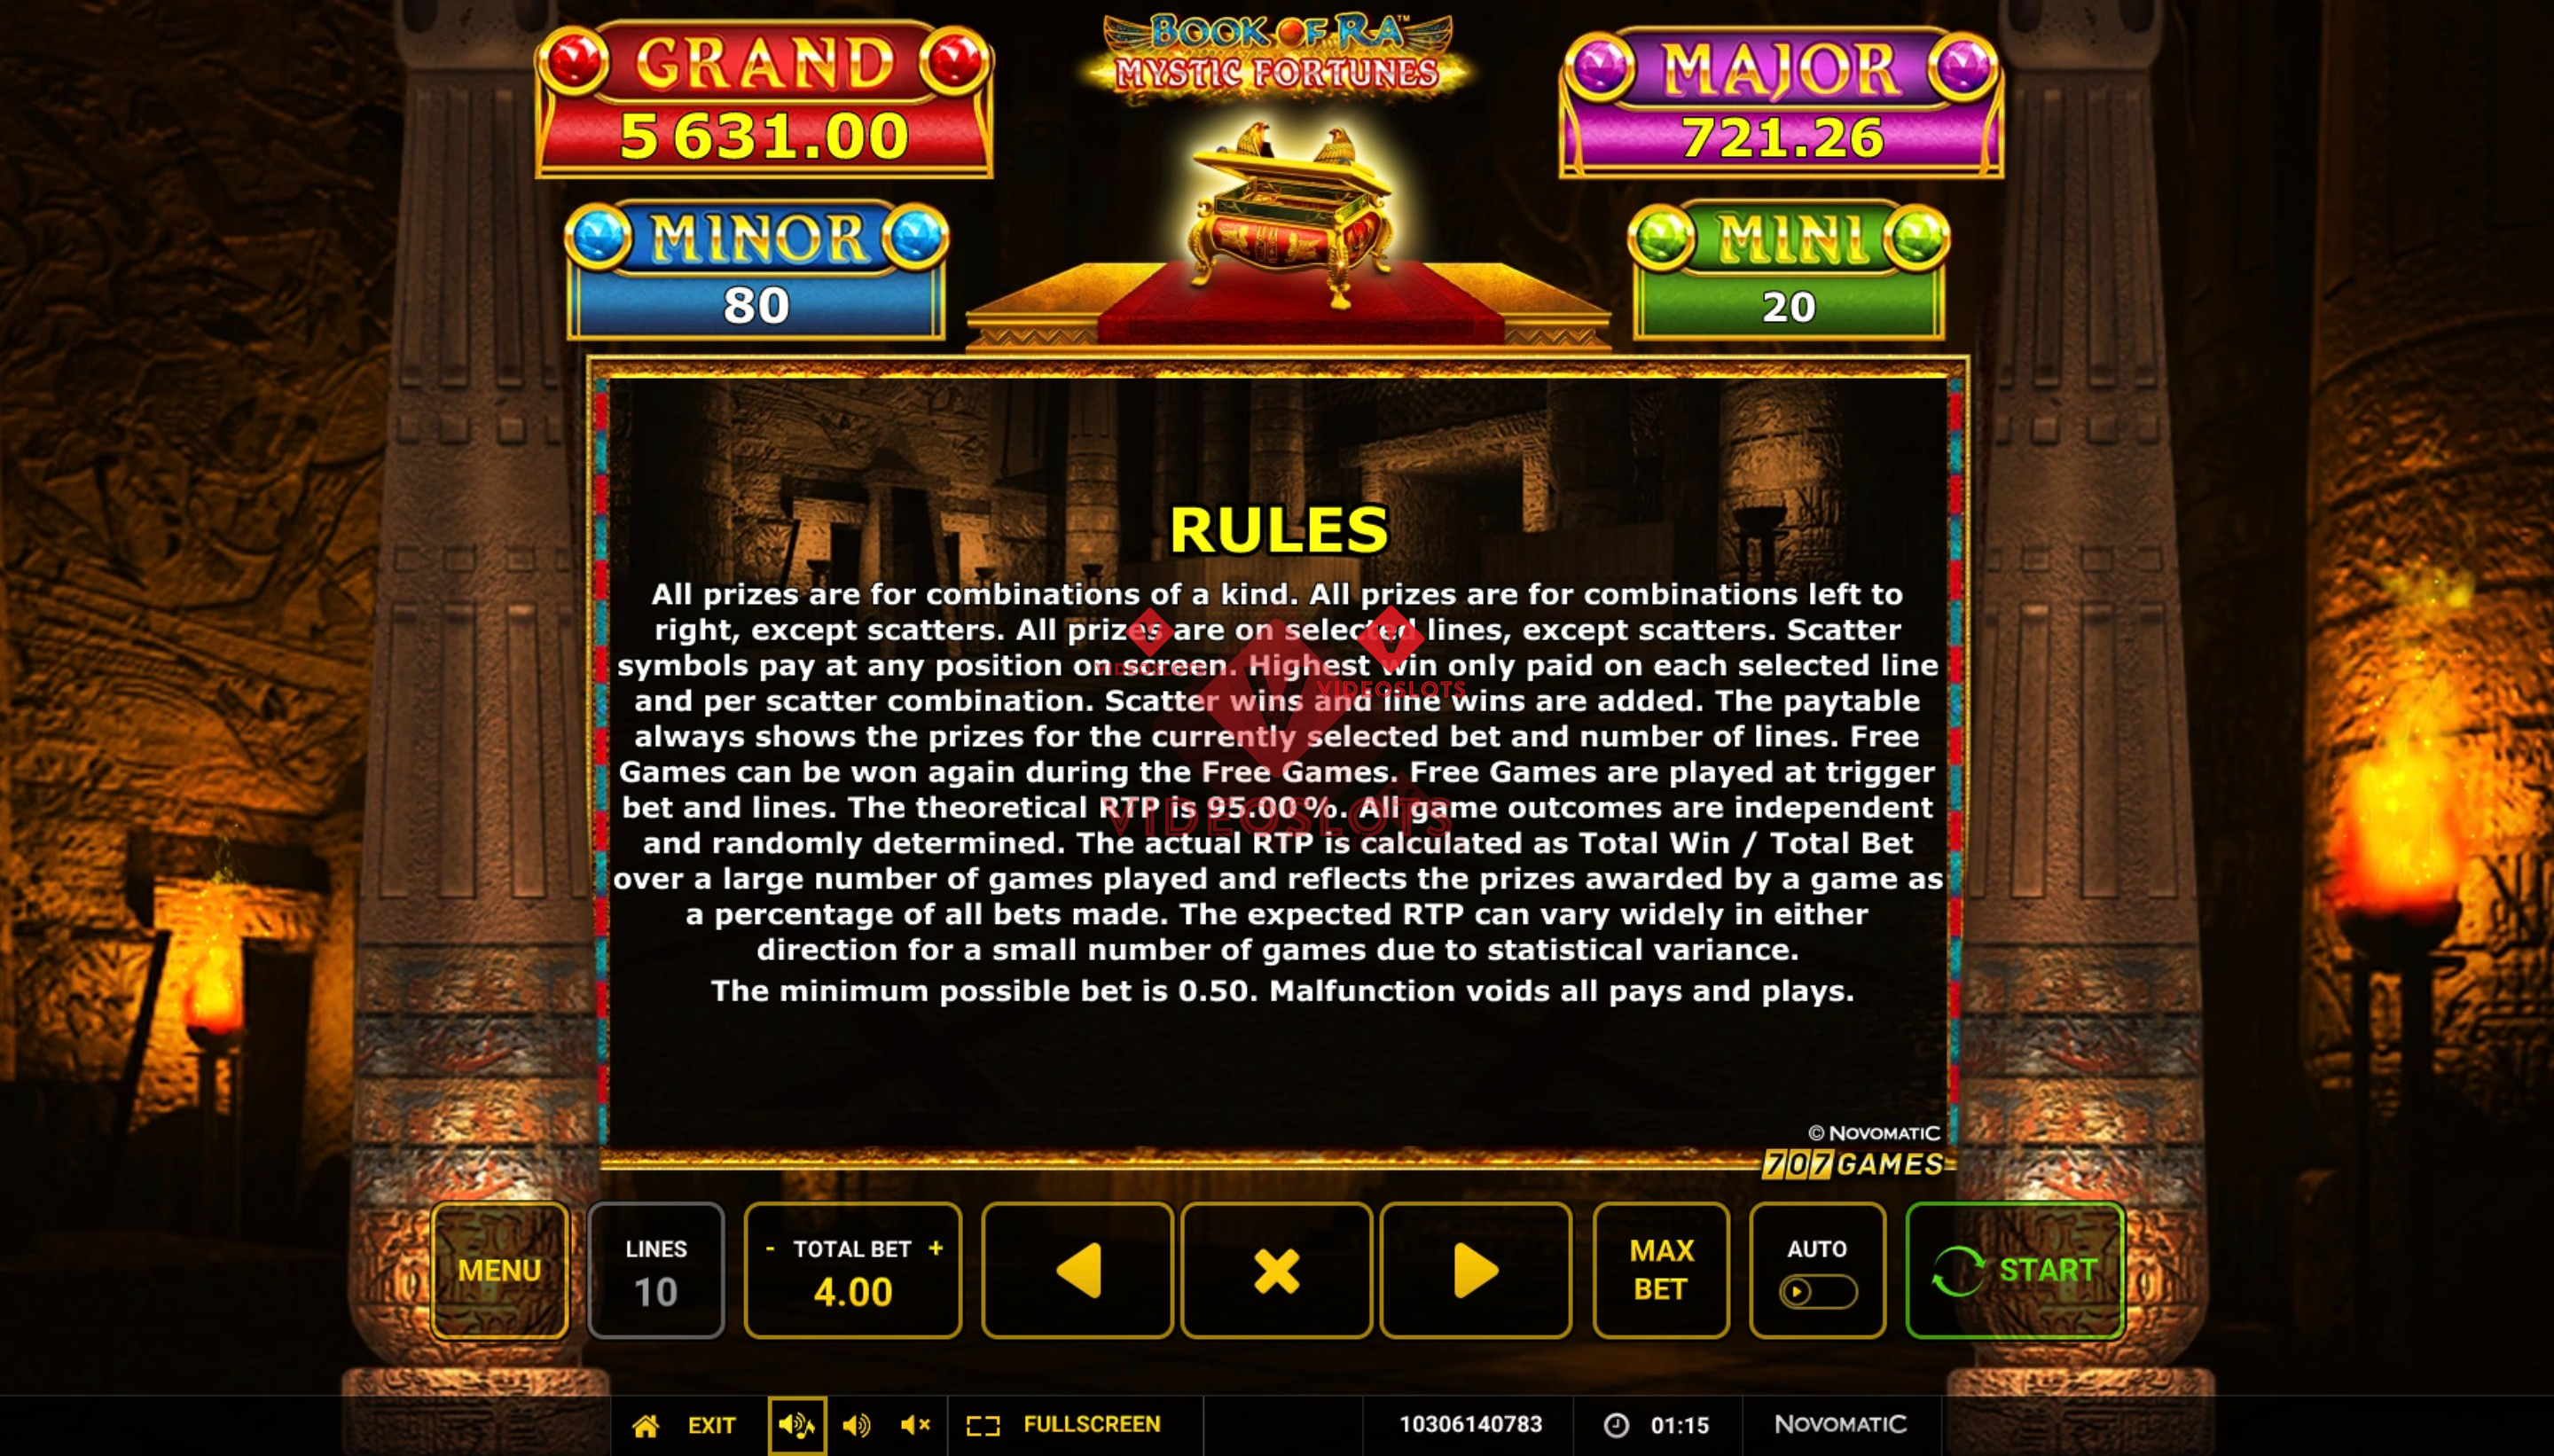 Game Rules for Book of Ra Mystic Fortunes slot from Greentube